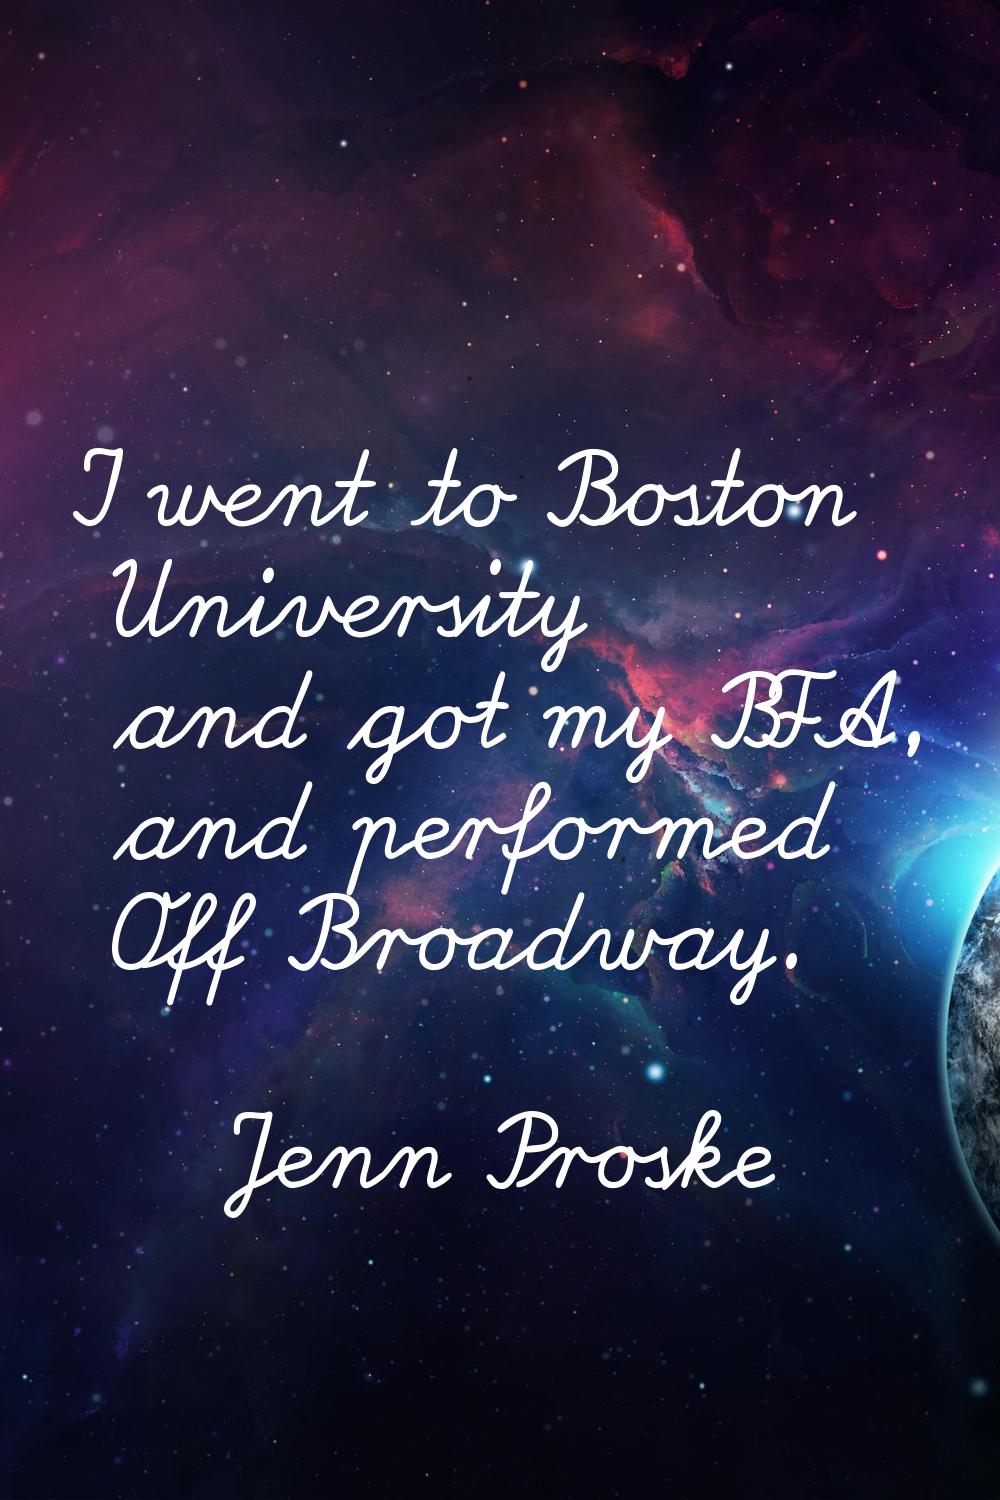 I went to Boston University and got my BFA, and performed Off Broadway.